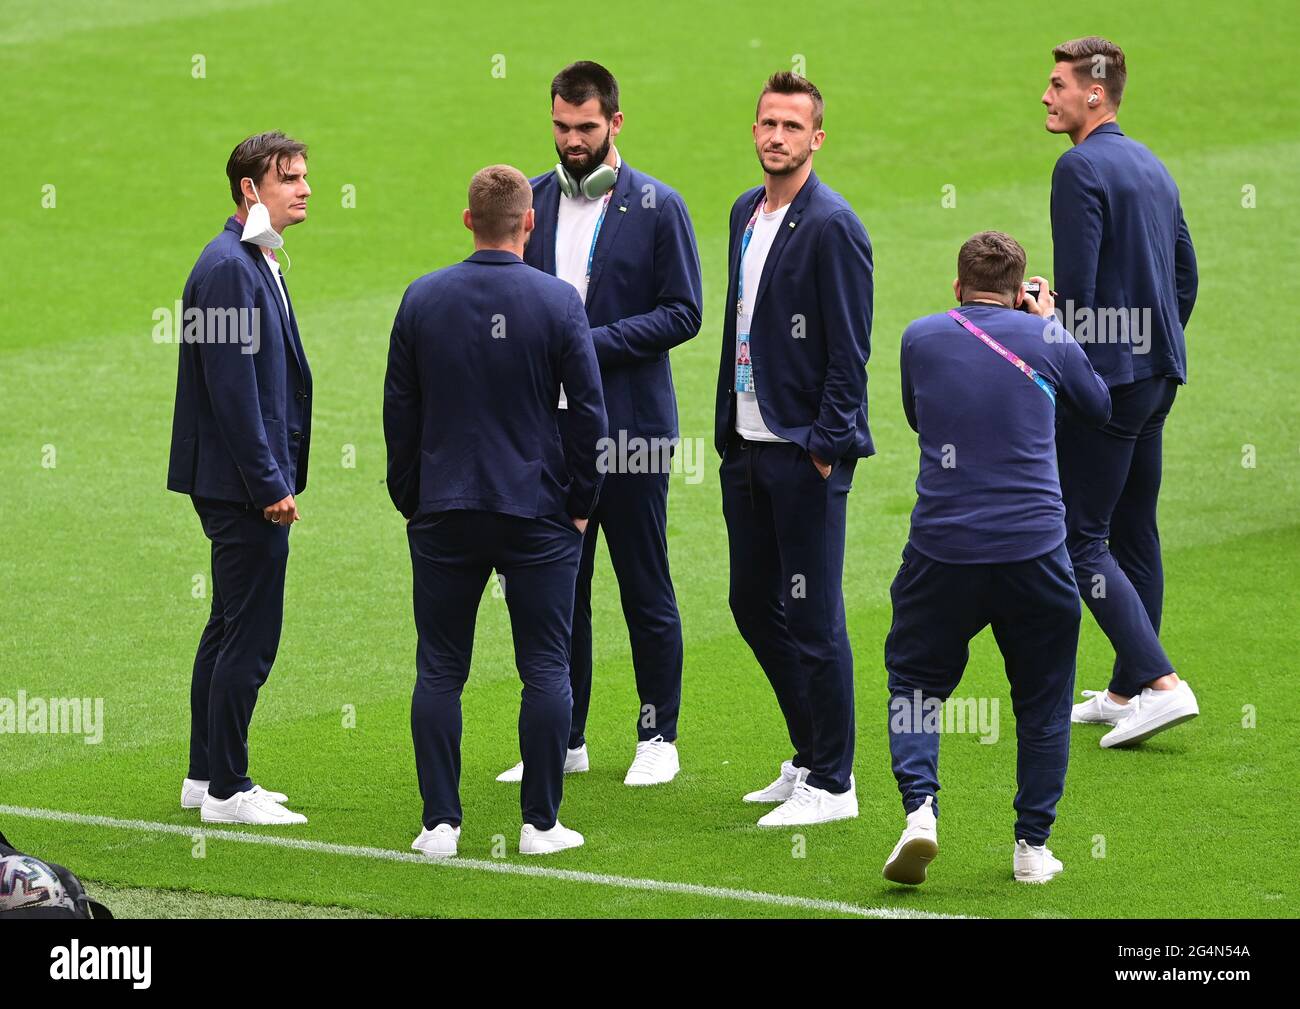 Soccer Football - Euro 2020 - Group D - Czech Republic v England - Wembley Stadium, London, Britain - June 22, 2021 Czech Republic players on the pitch before the match Pool via REUTERS/Neil Hall Stock Photo